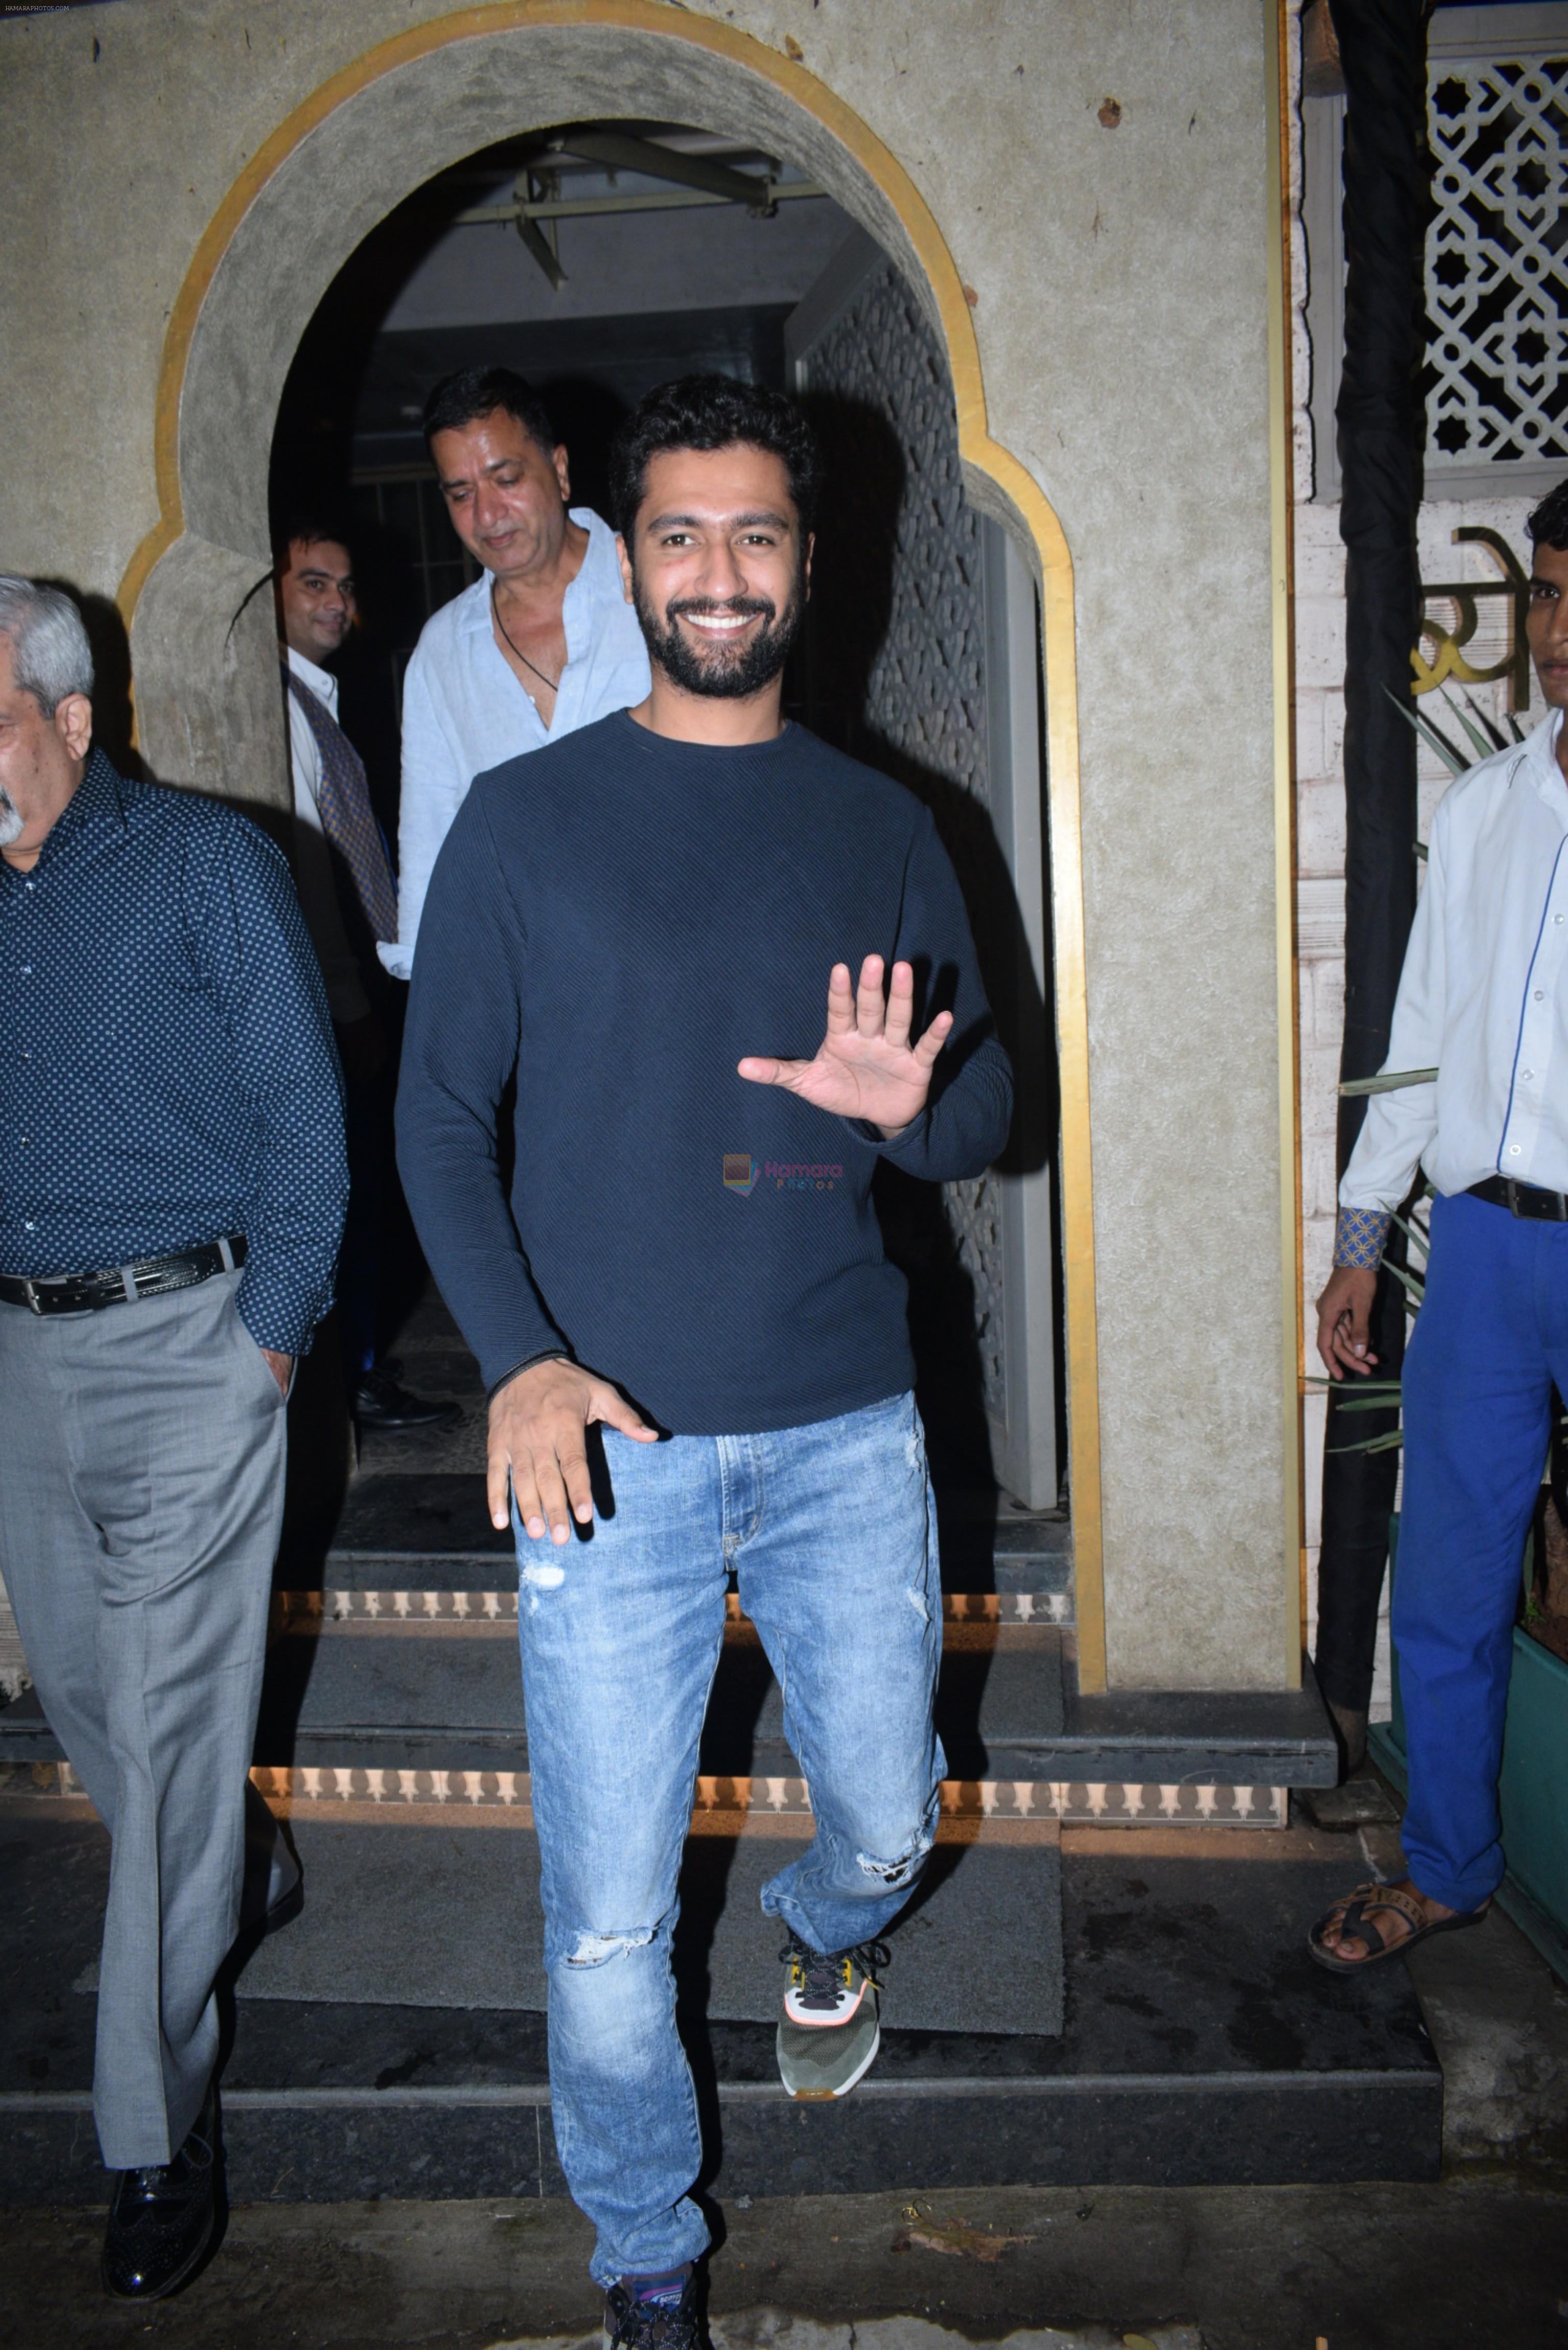 Vicky Kaushal's family spotted at bayroute in juhu on 28th July 2019